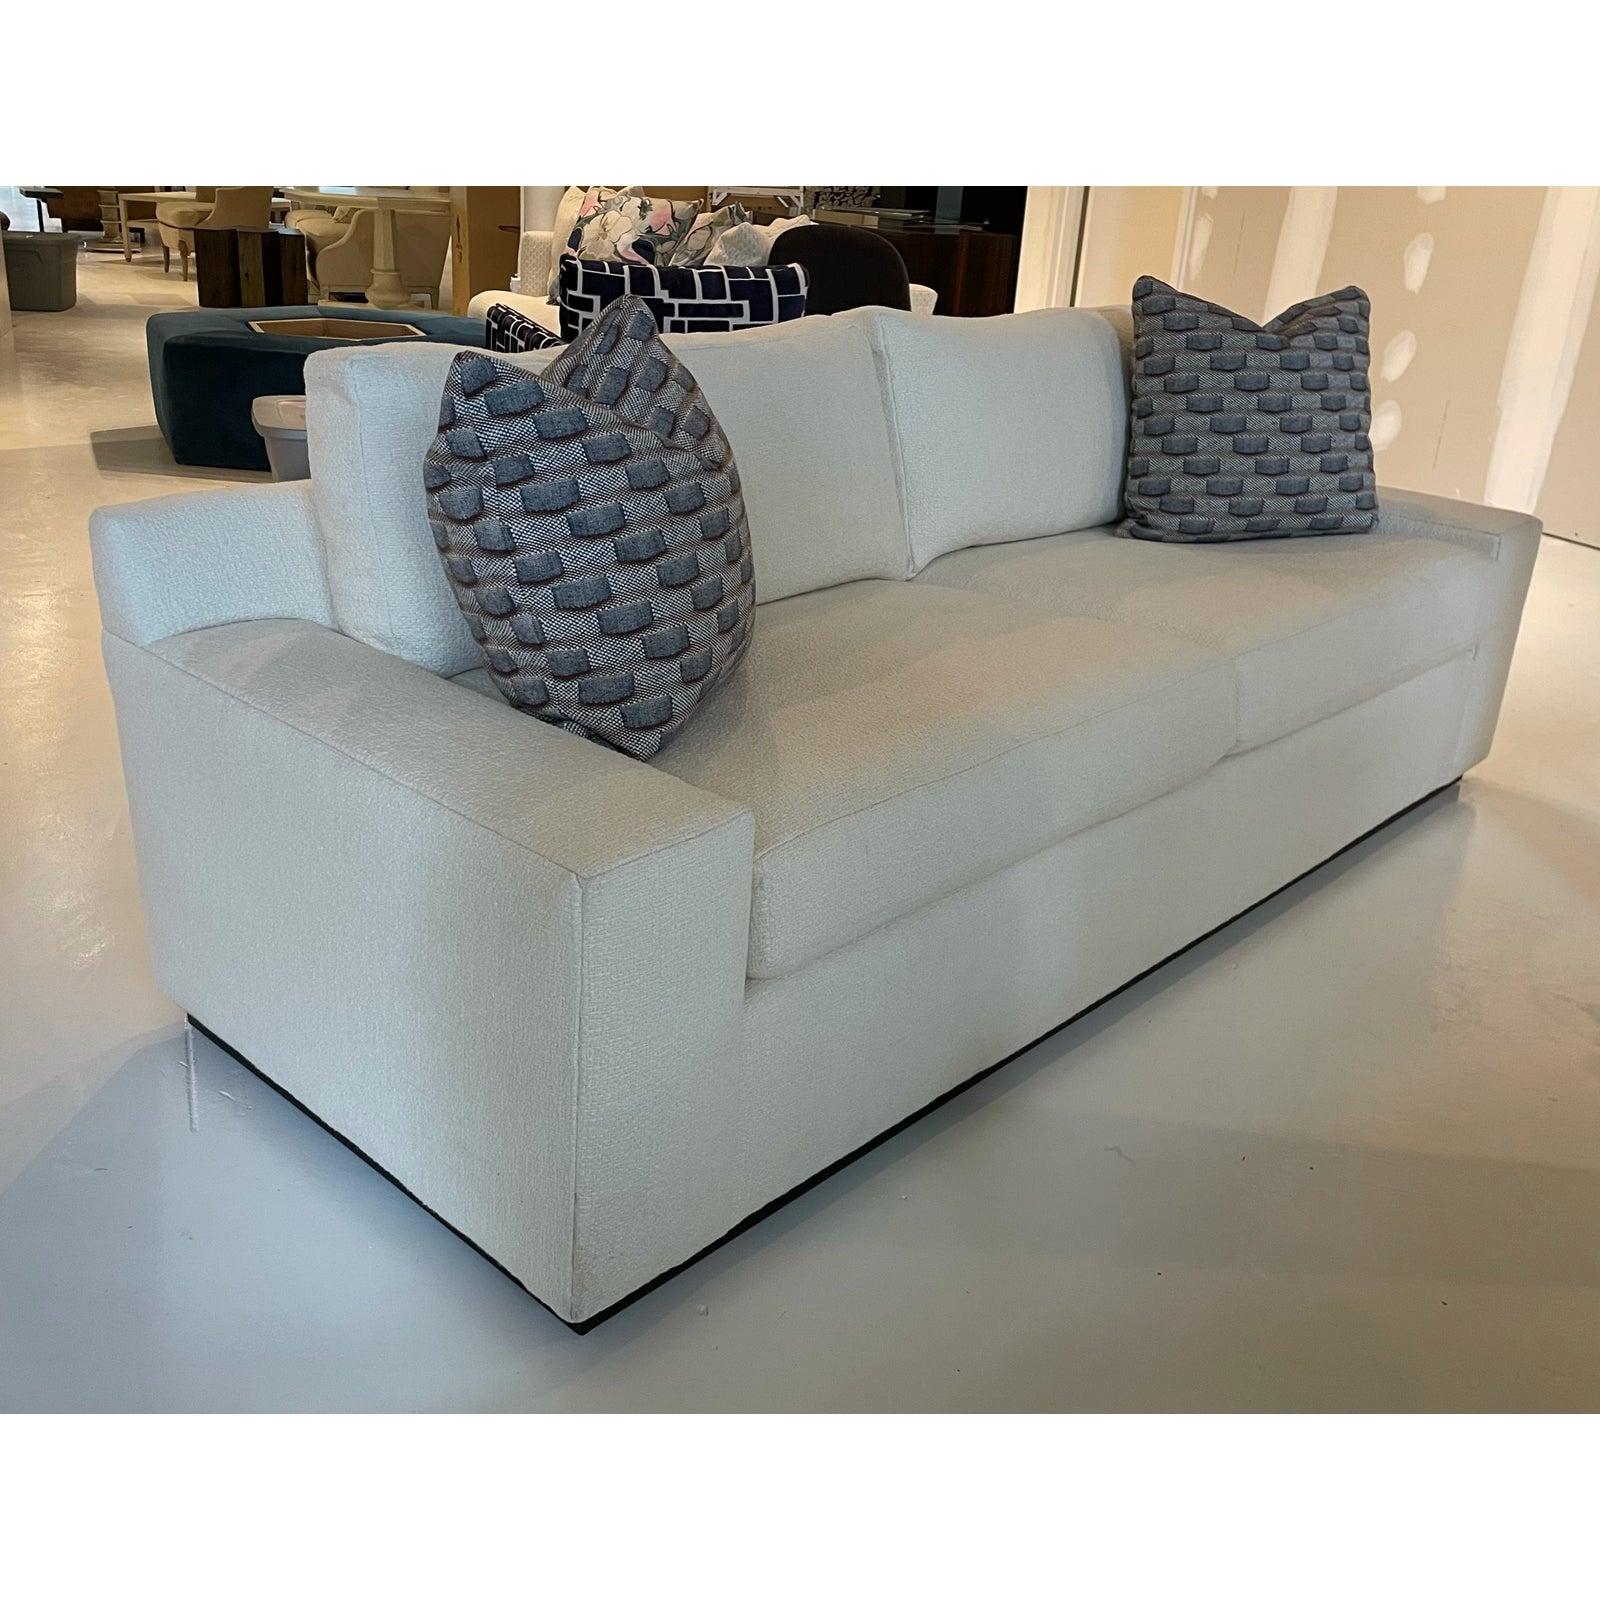 Showroom New. Modern/Contemporary style sofa with wide track arms and clean lines. Complimented with a recessed plinth base. Covered in a white boucle fabric with contrasting throw pillows. Extreme comfort is created with ultra down seat cushions